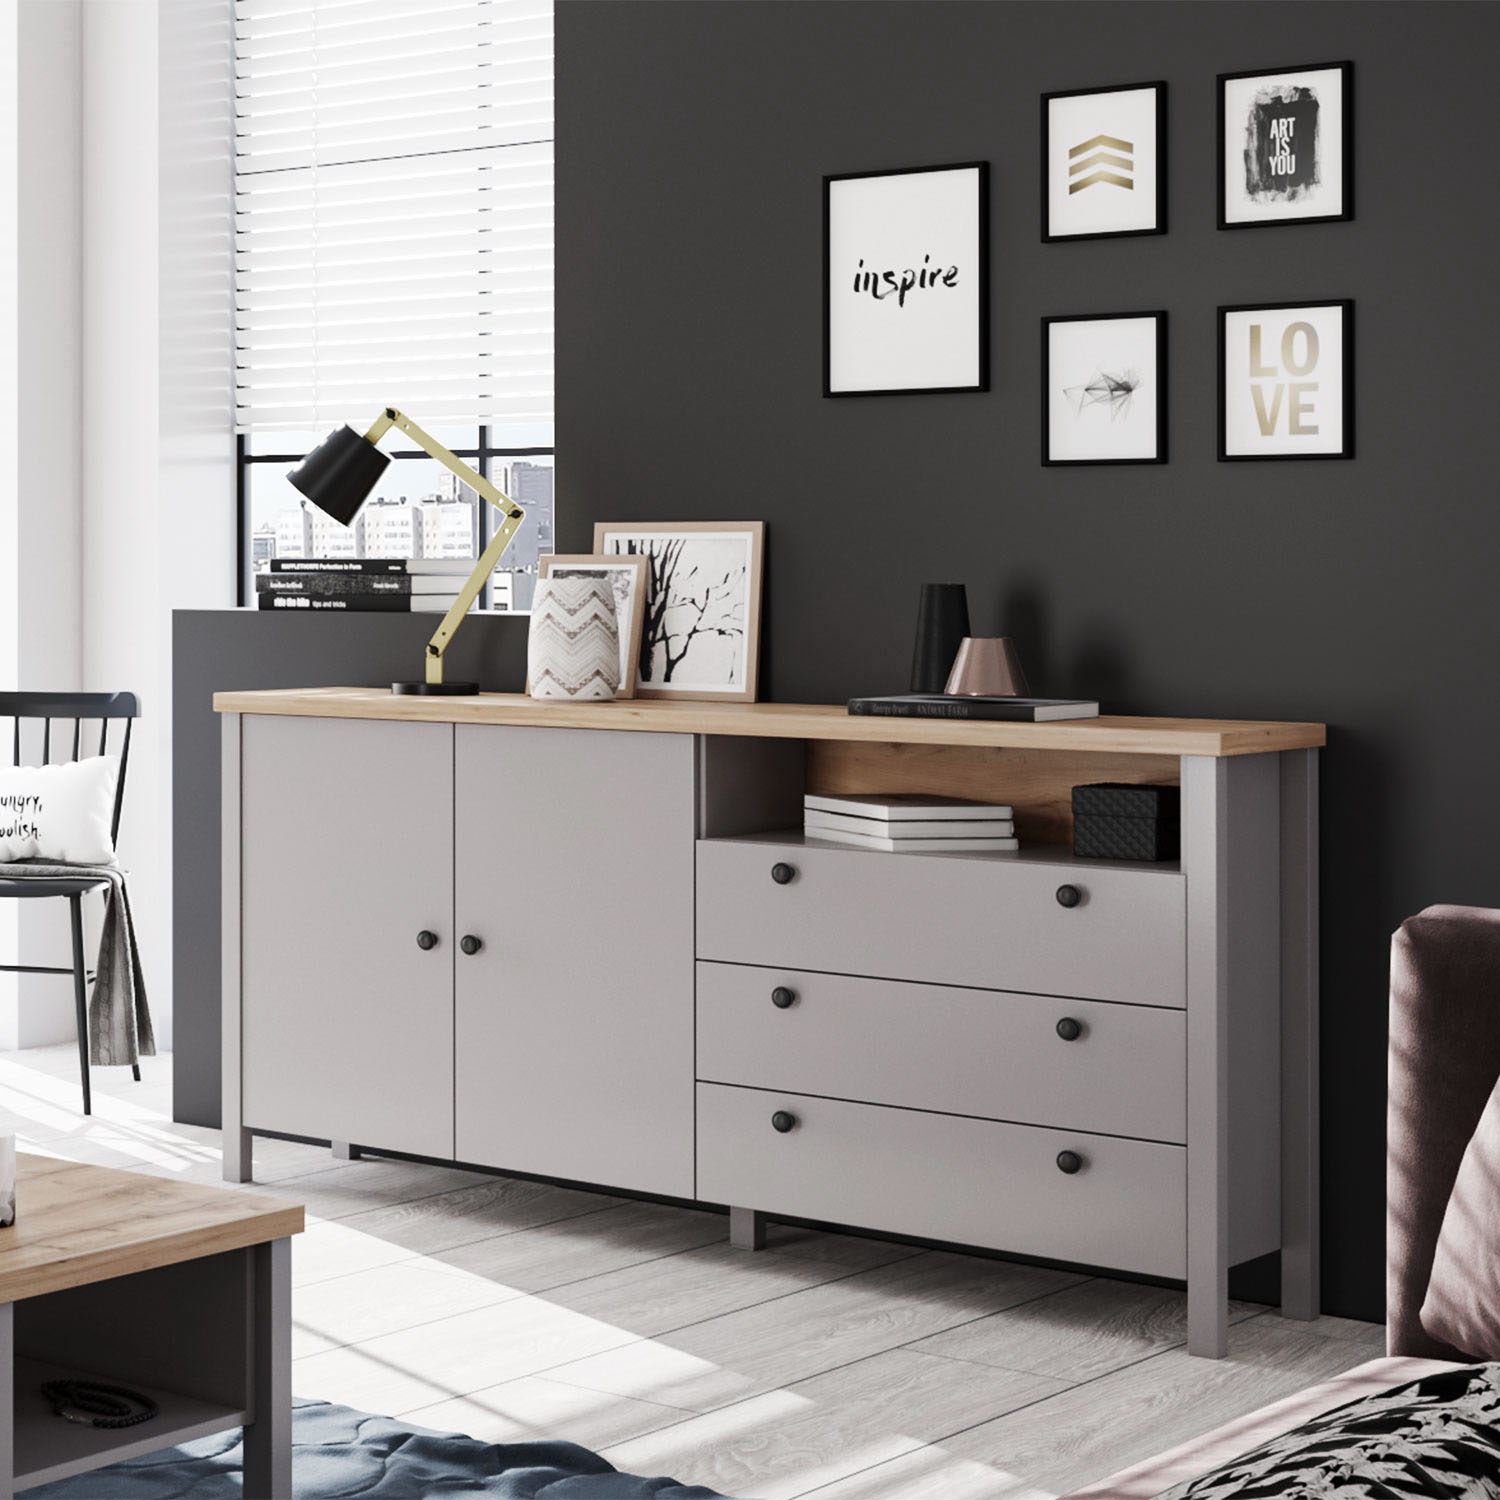 Chest of Drawers Sideboard Grey 166.5 cm Wood Solid Cupboard with 3 Drawers Highboard Living Room Cabinet